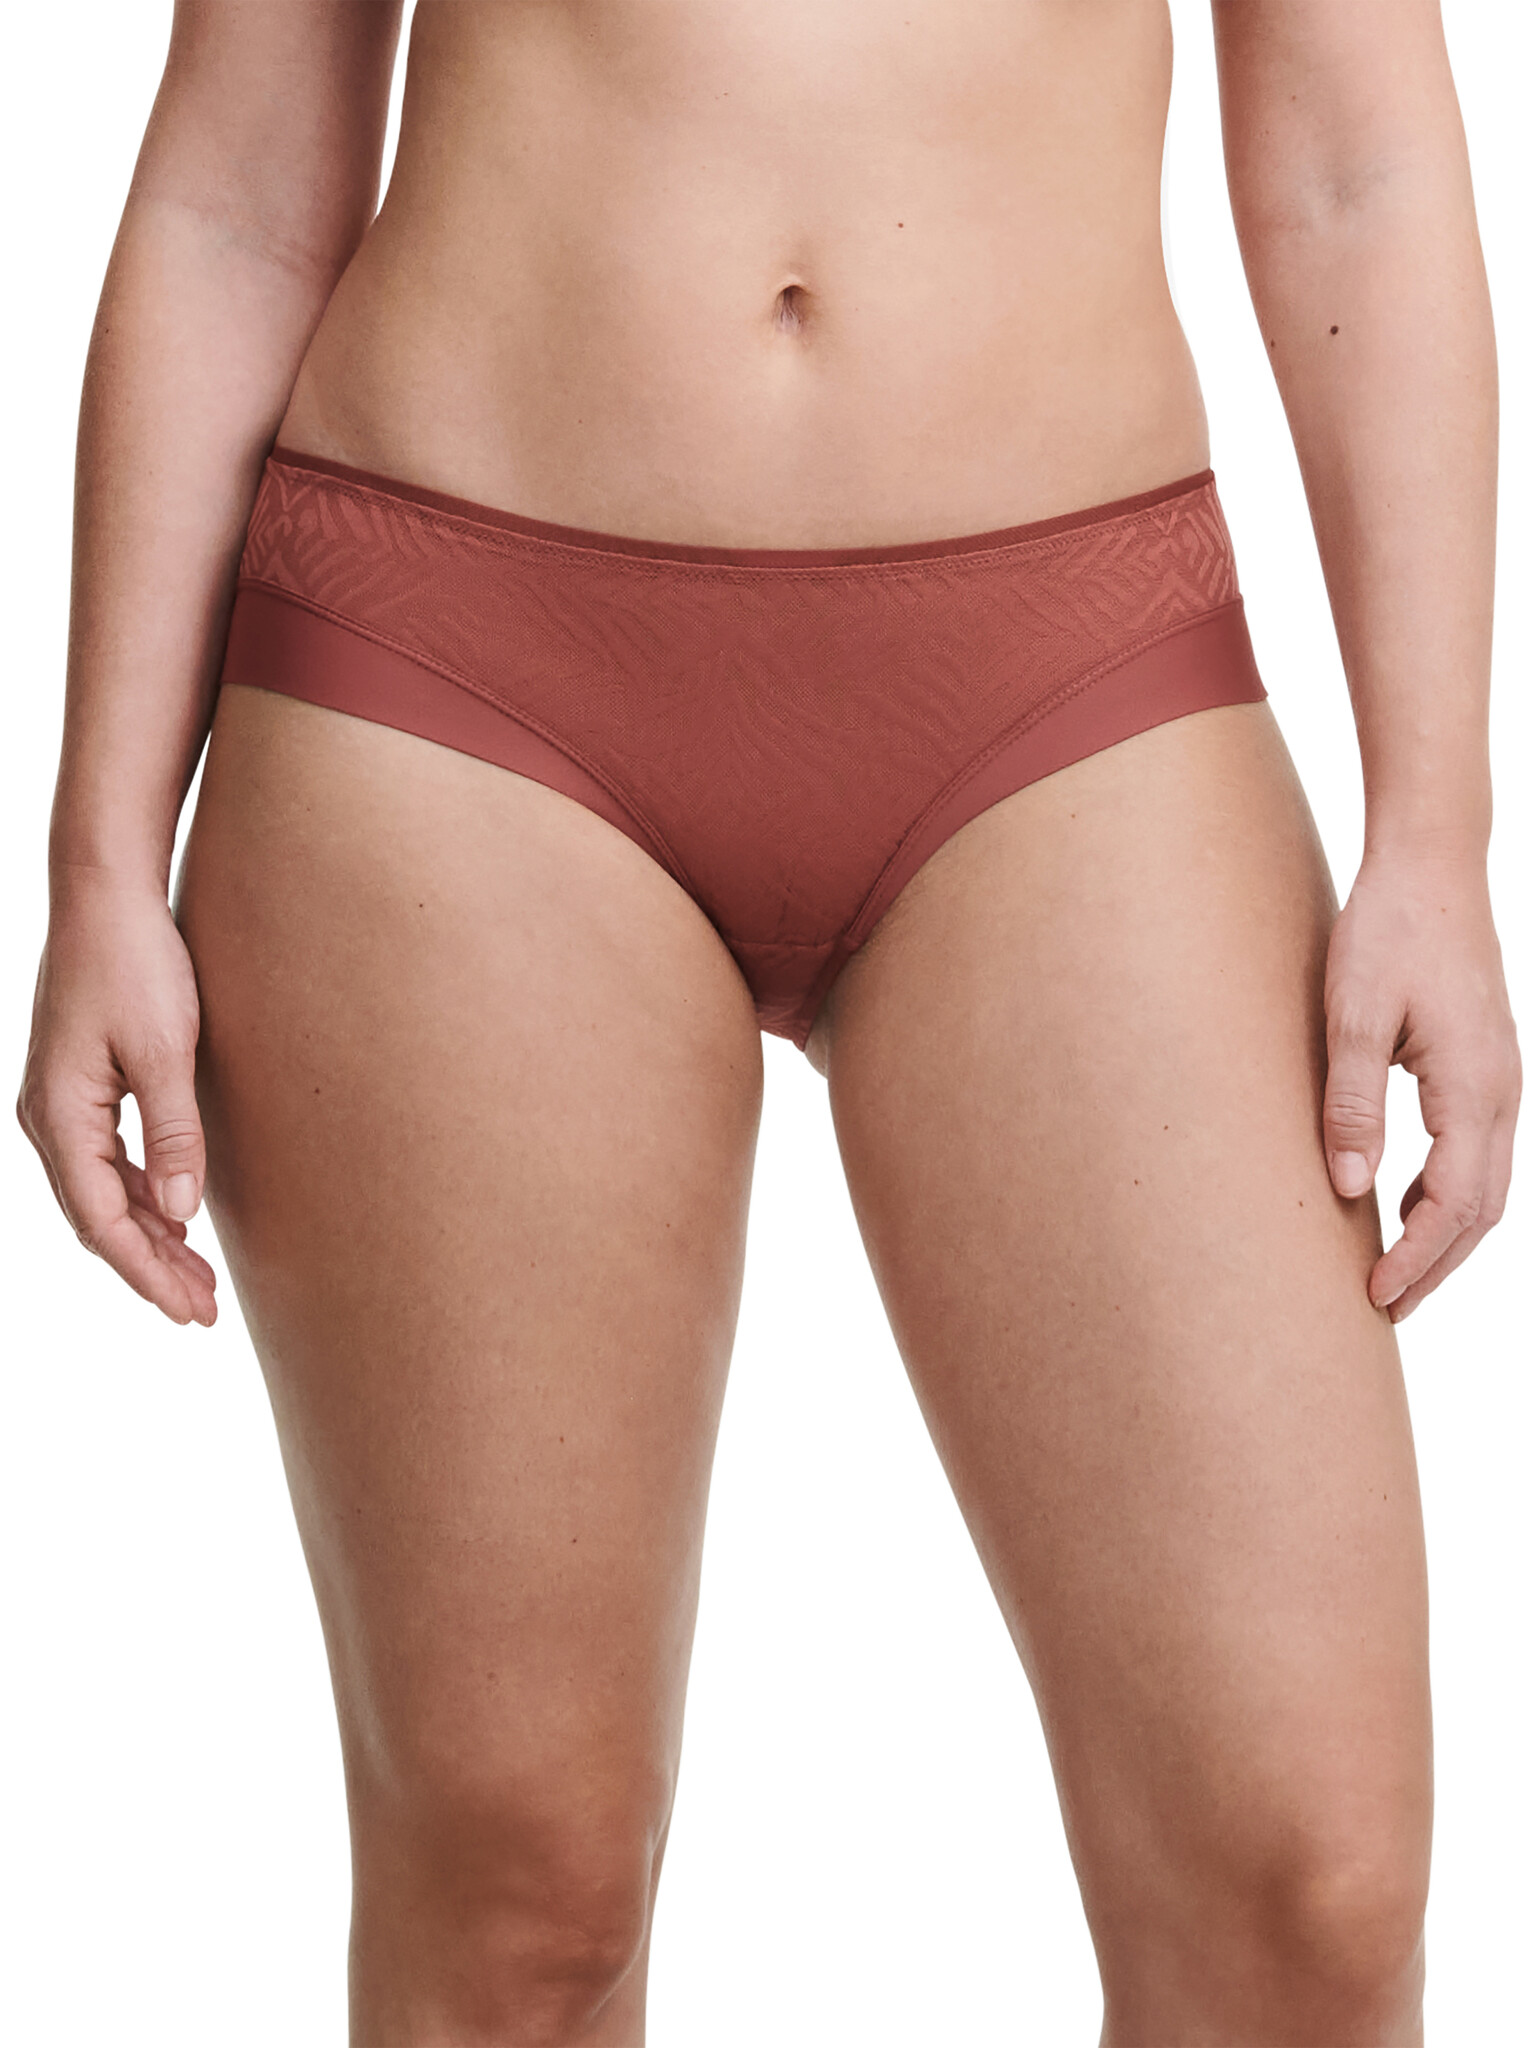 Chantelle Fall in Love Hipster, Passionata designed by CL, Panty Style 4954